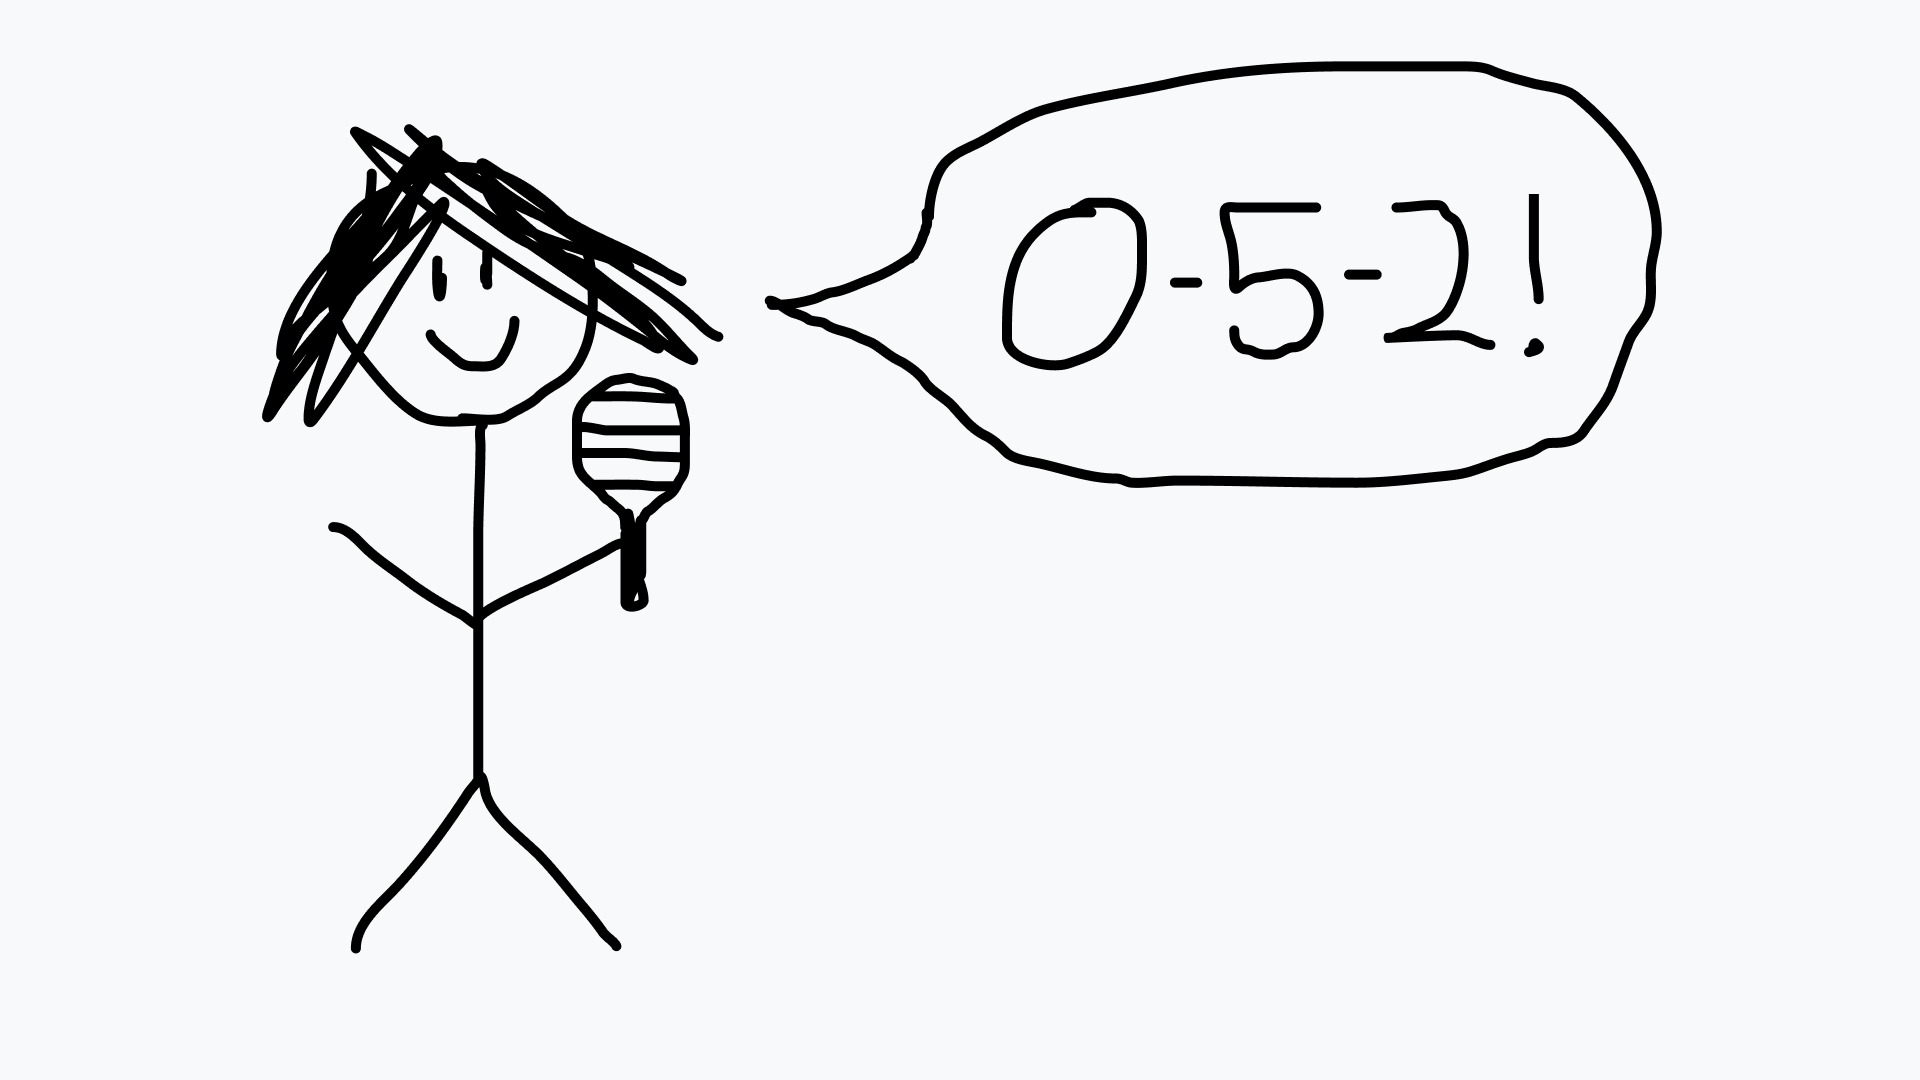 A scrawled drawing of a woman holding a pickleball paddle shouting "0-5-2!"